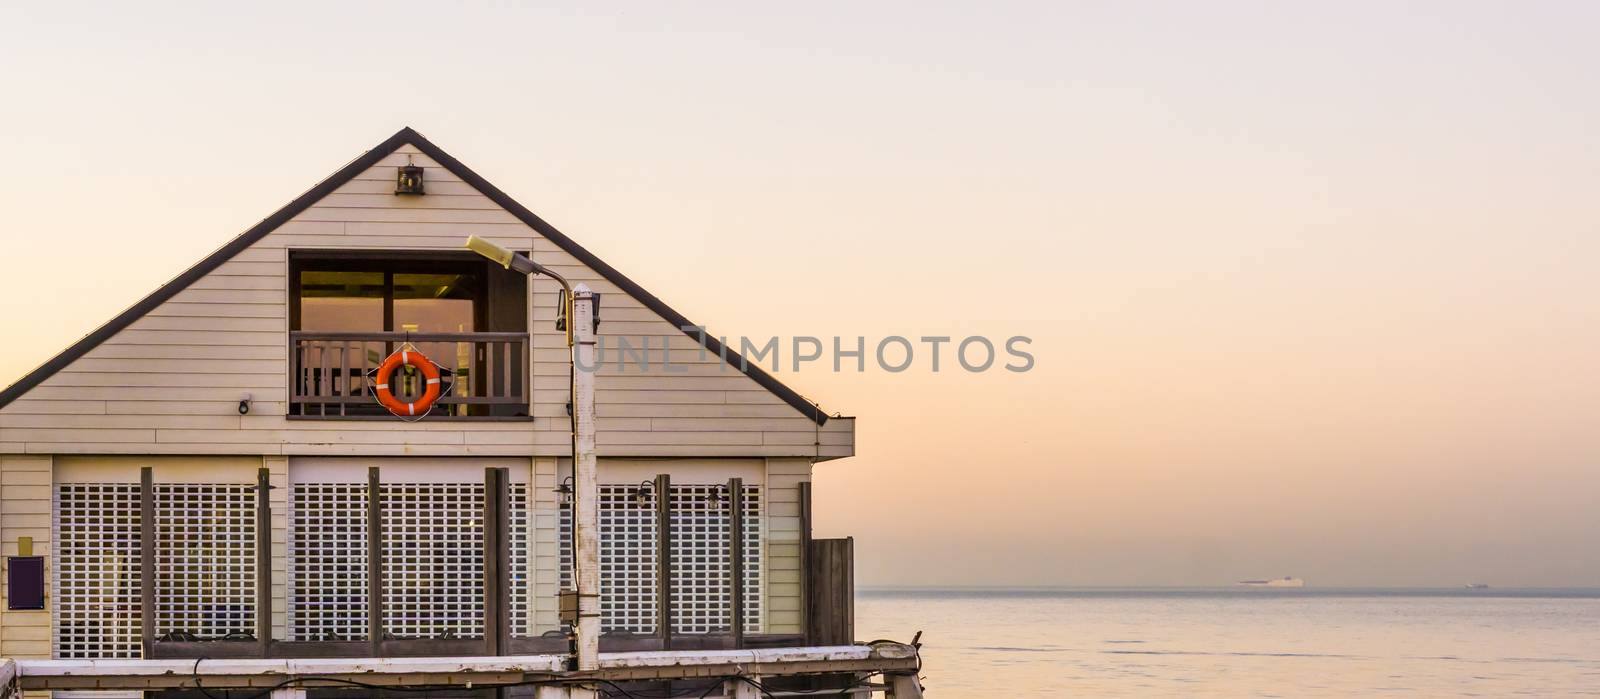 white beach house on the pier of Blankenberge, Belgium, Architecture of the Belgian coast at sunset by charlottebleijenberg